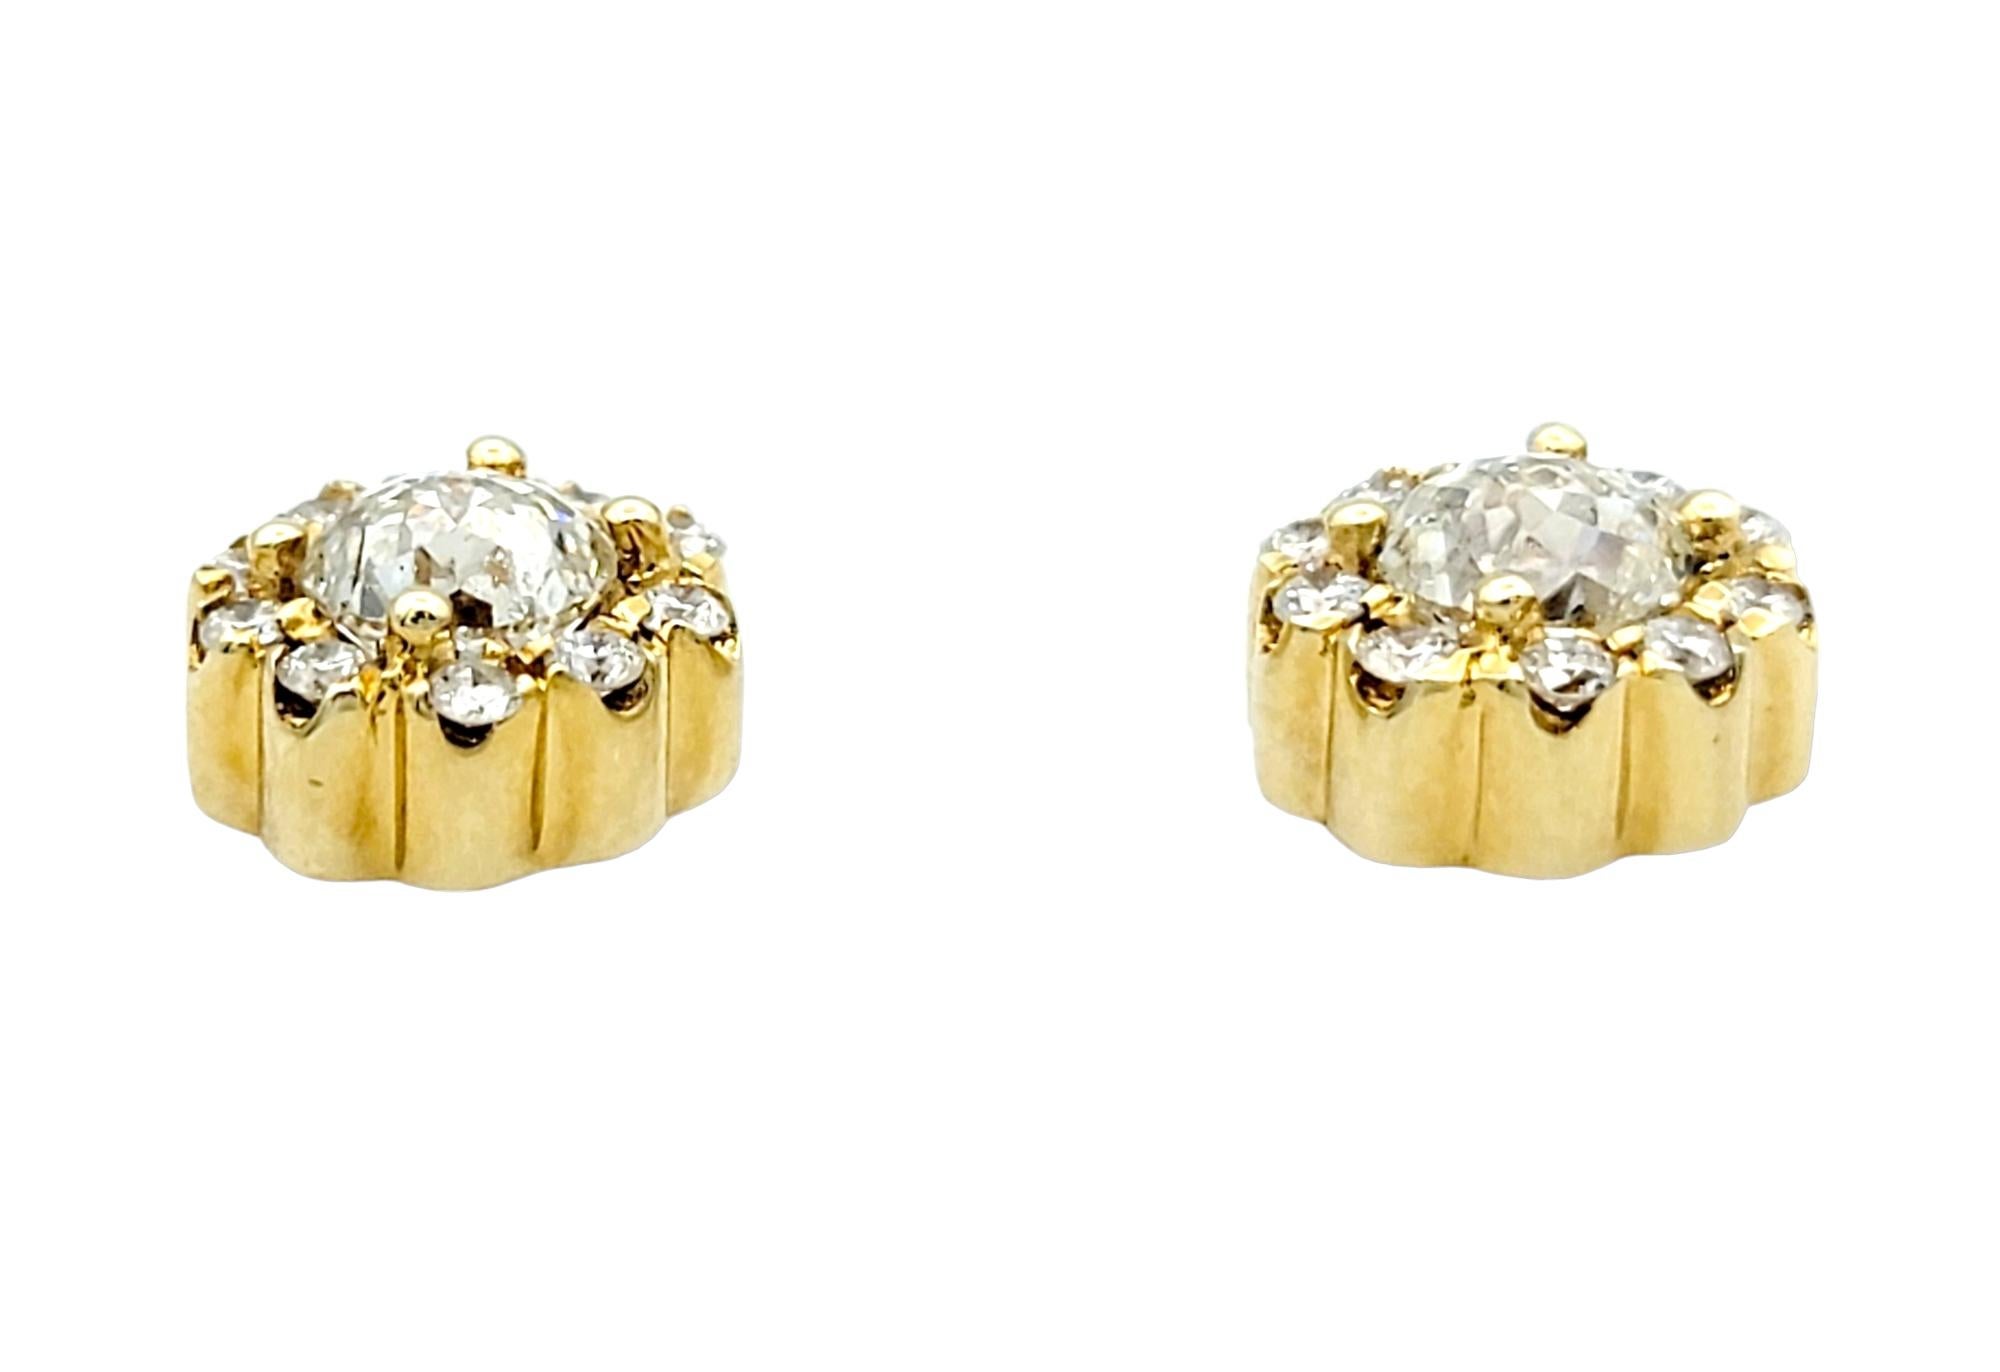 Elegance and brilliance converge in this sparkling pair of stud earrings, expertly crafted in lustrous 18 karat yellow gold. Each earring features a captivating 